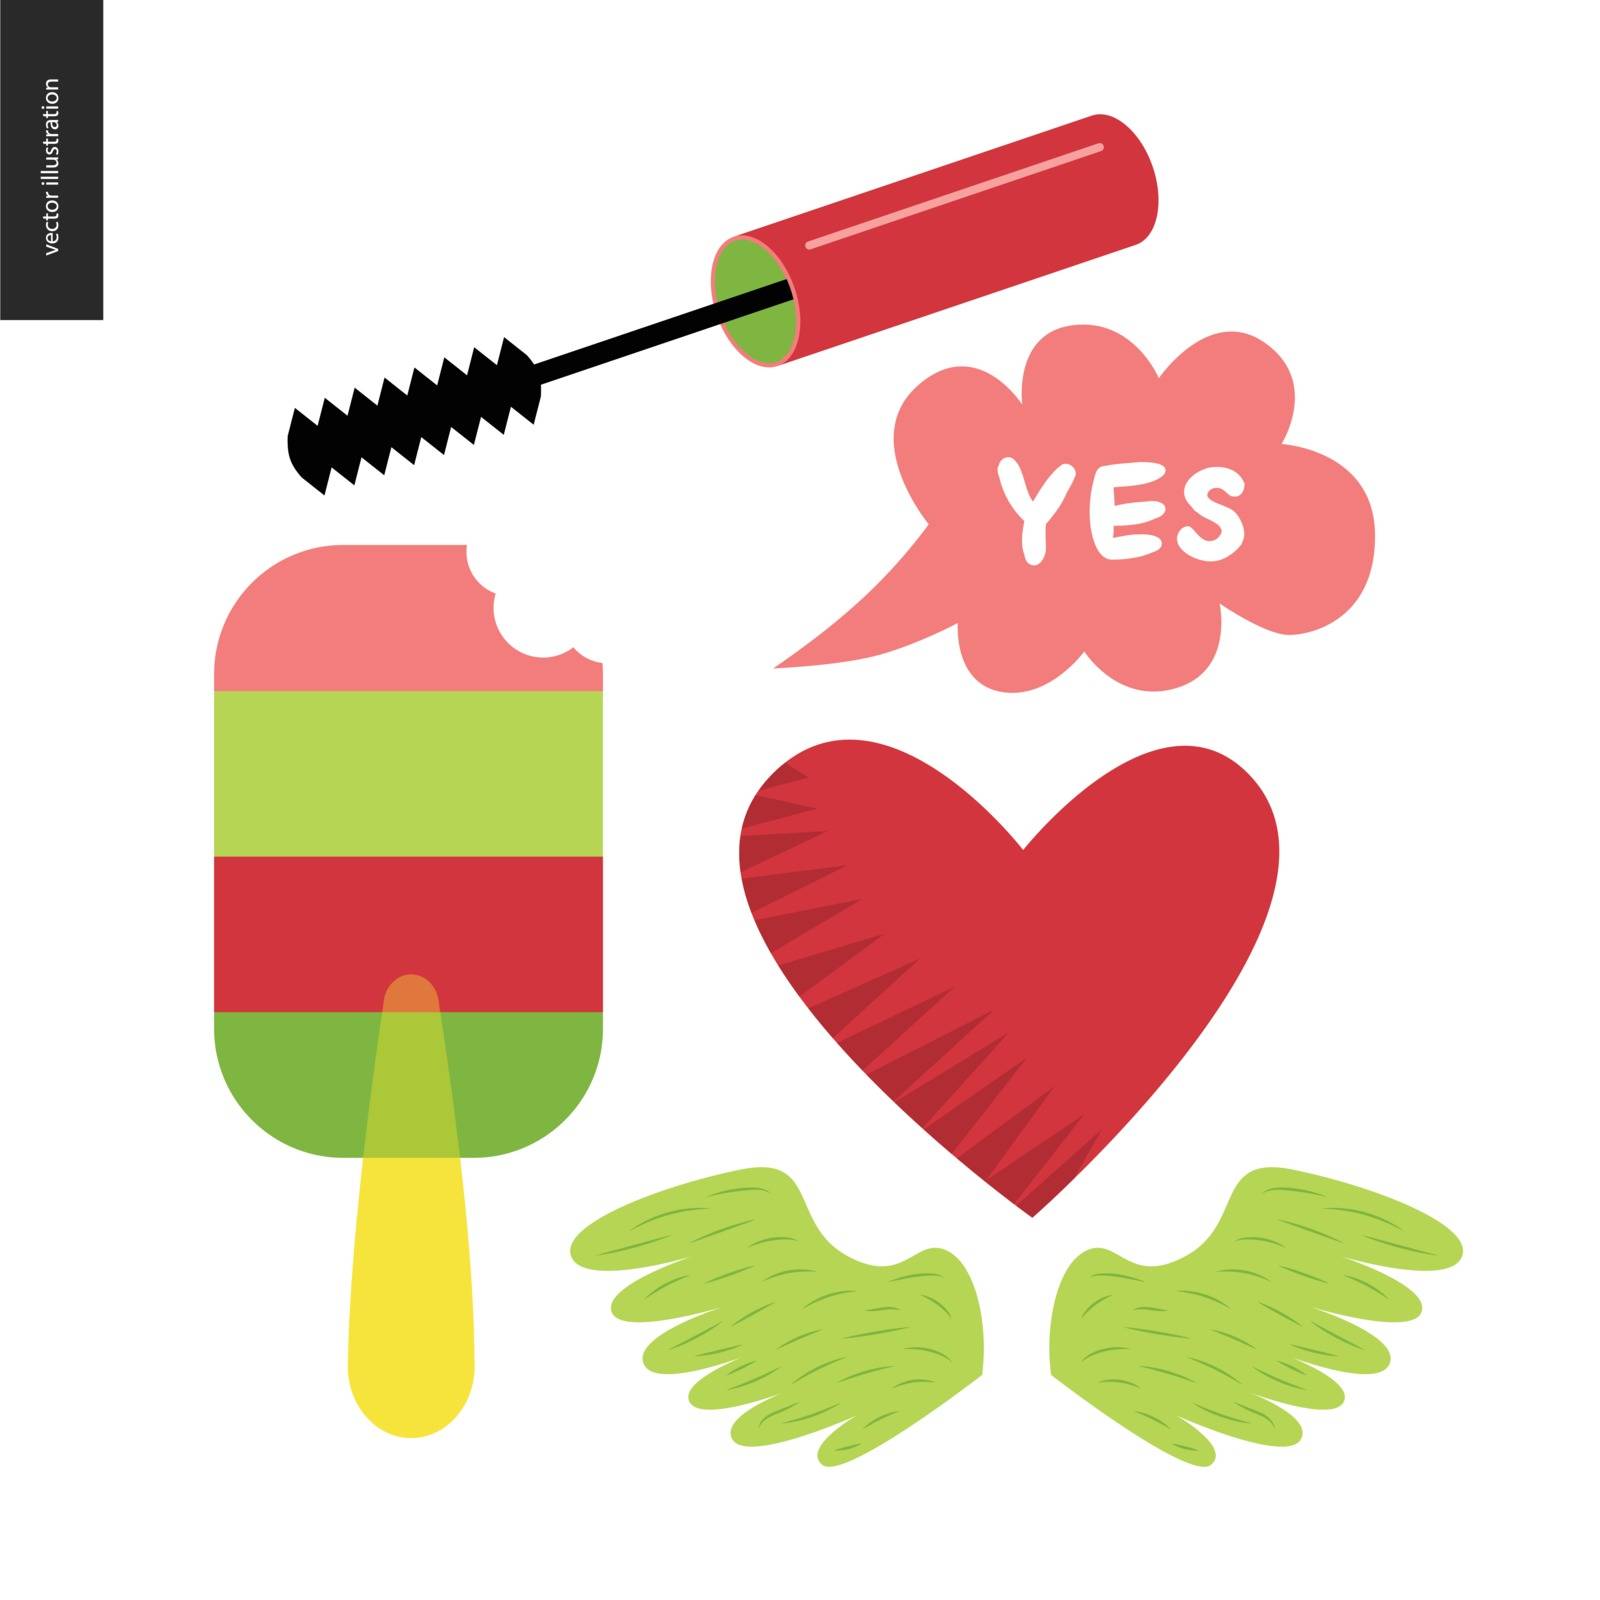 Girlish icons stickers set. Vector flat cartoon illustrated icons of few girl elements - masara brush, transparent popsicle, heart, a pare of wings and lettering Yes bubble.